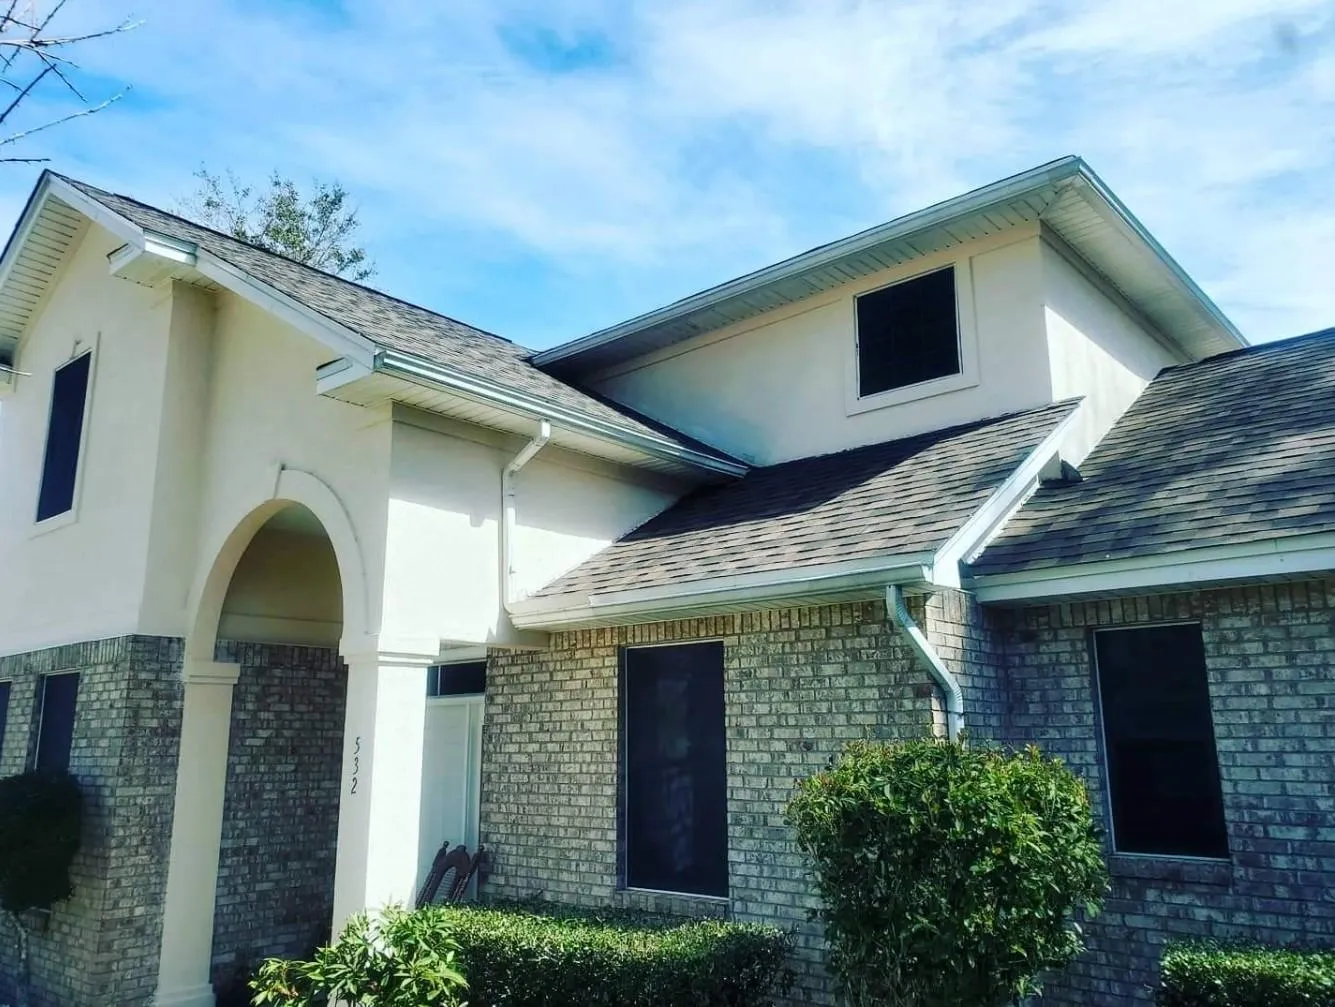 Residential Real Estate Roofing for Platinum Roofing in Crestview, FL